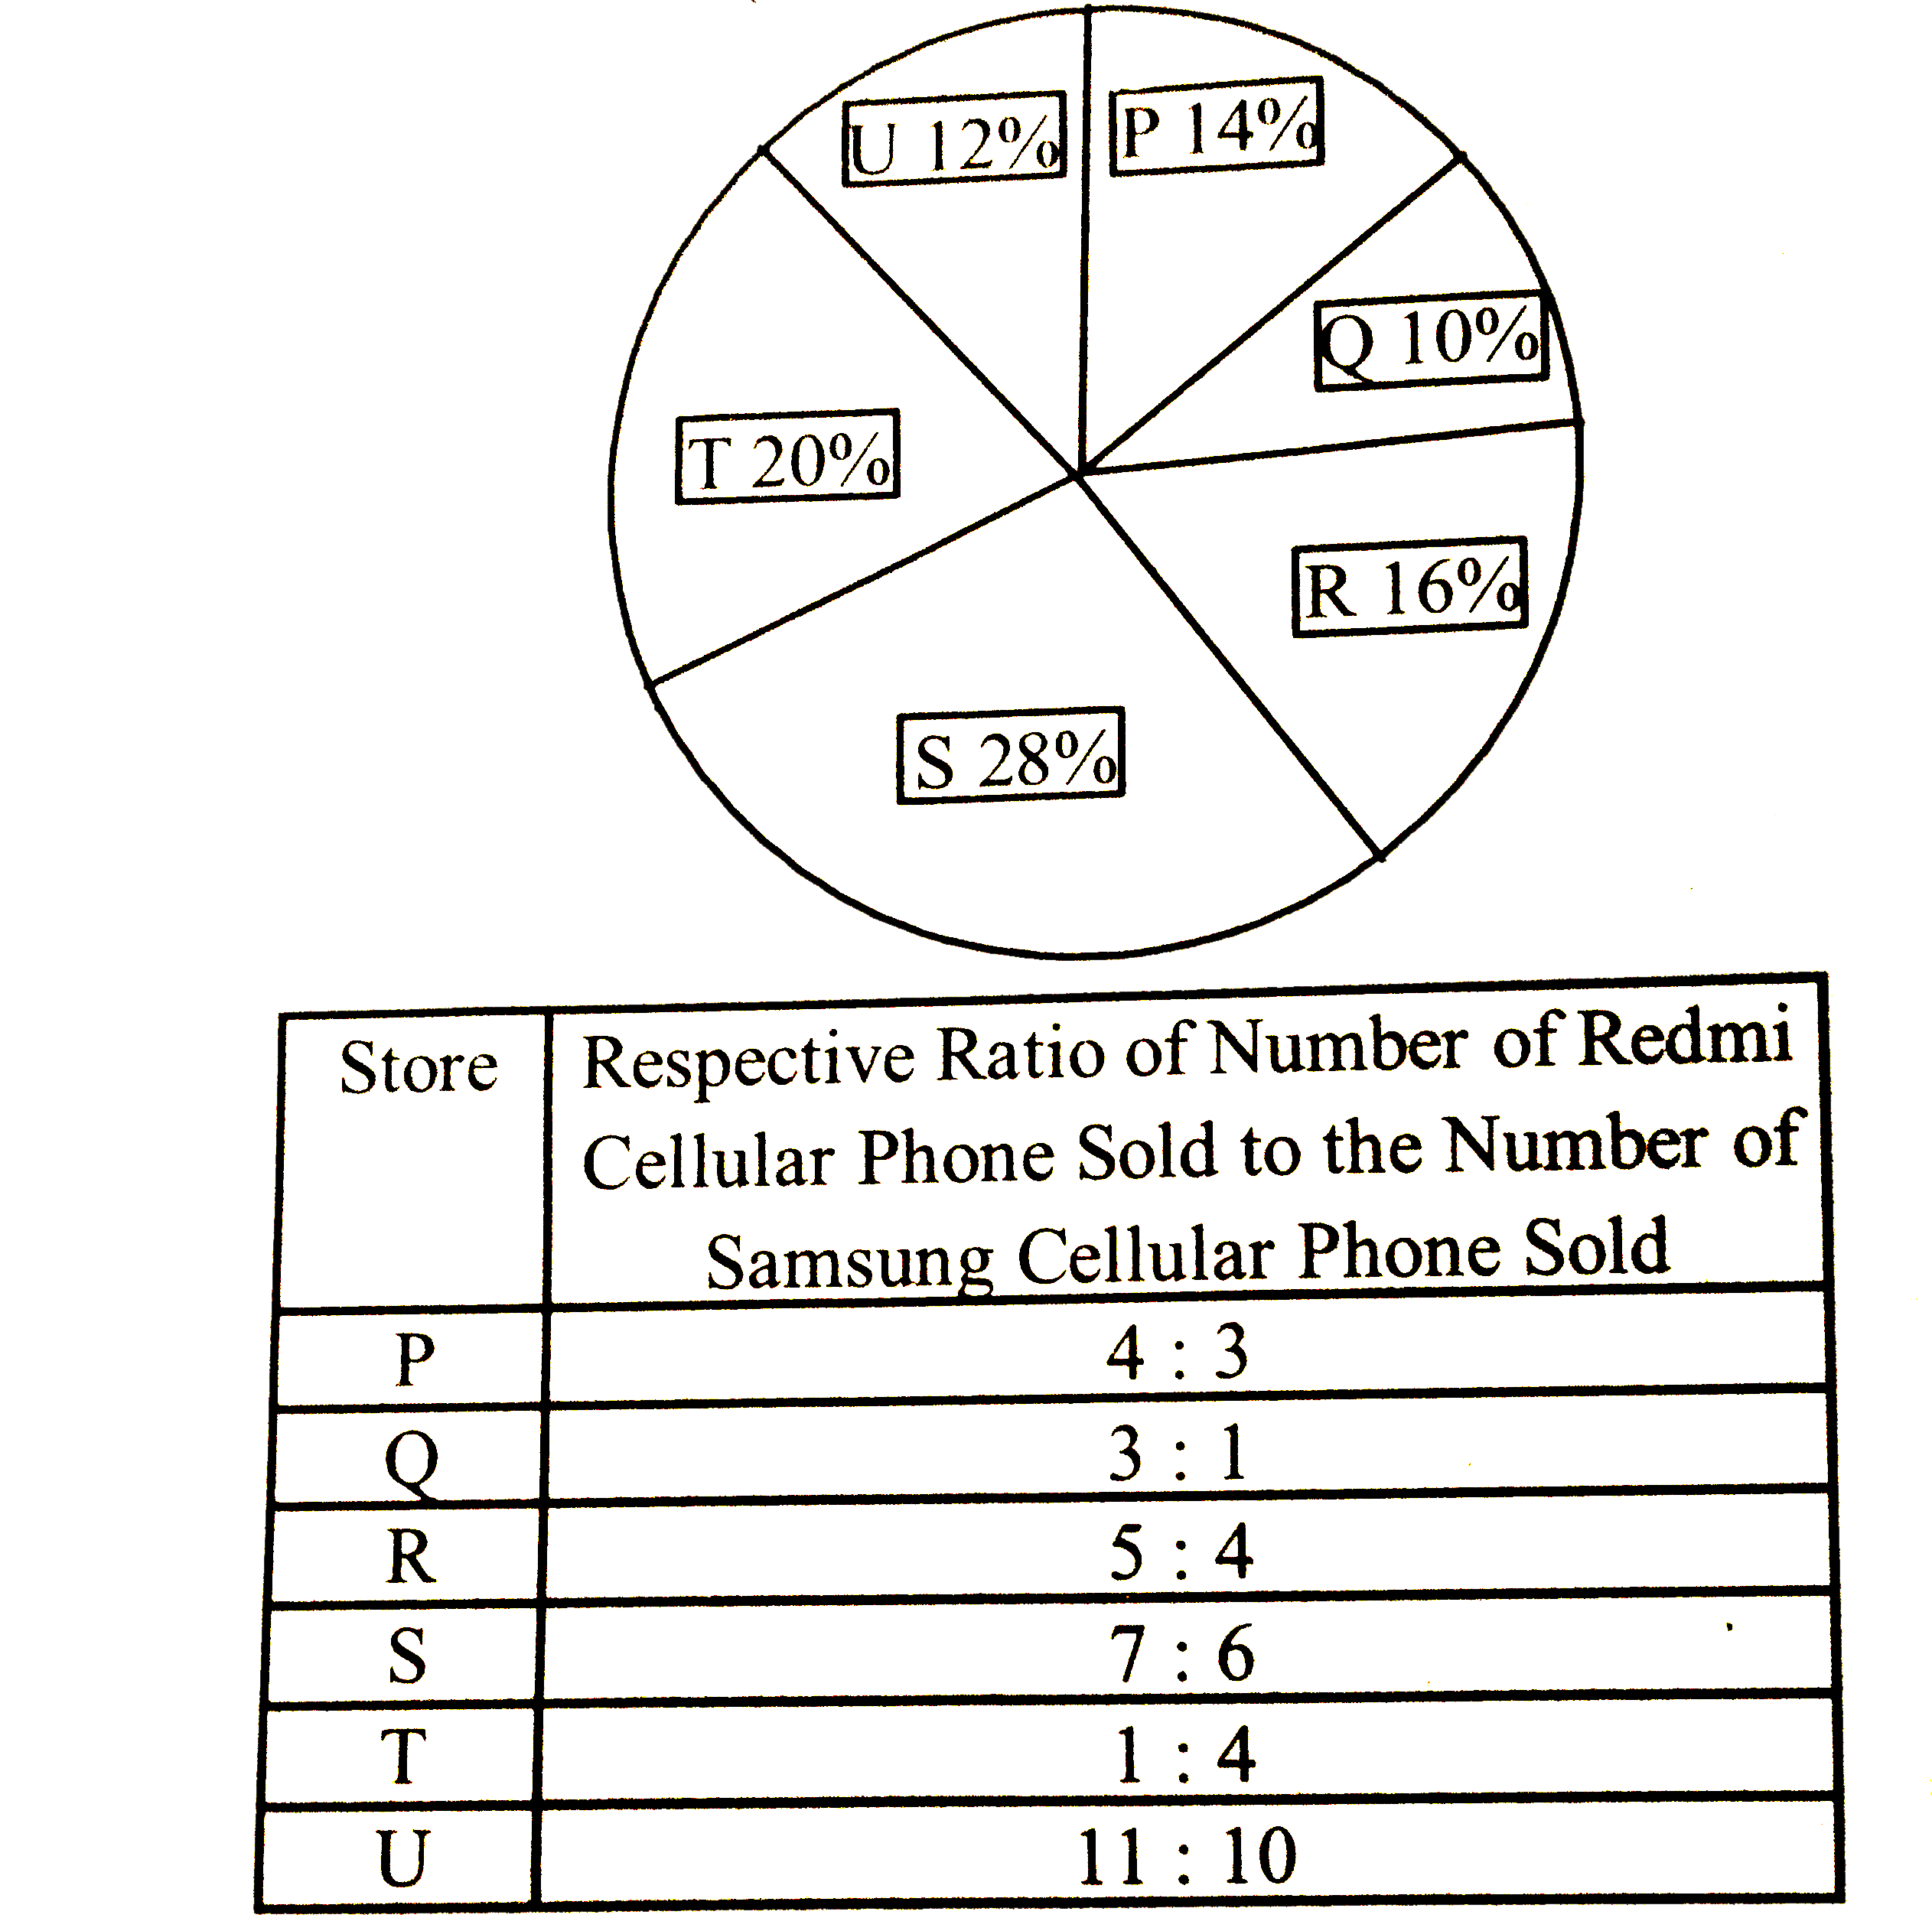 What is the respective ratio between number of Redmi cellular phones sold by stor S and total number of Samsung cellular phones sold by stores T and U together ?